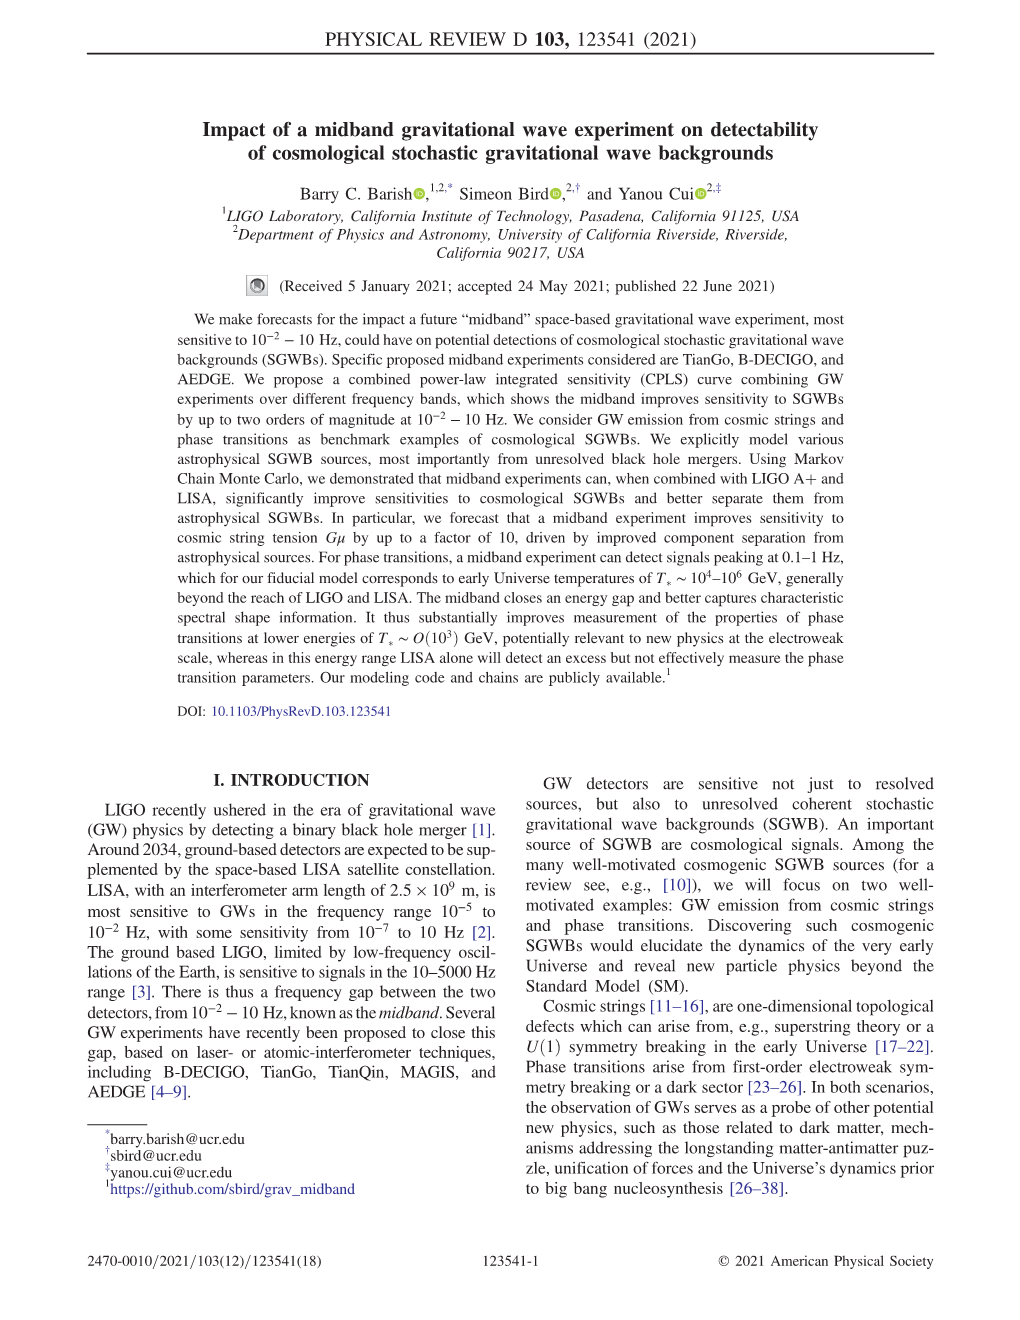 Impact of a Midband Gravitational Wave Experiment on Detectability of Cosmological Stochastic Gravitational Wave Backgrounds